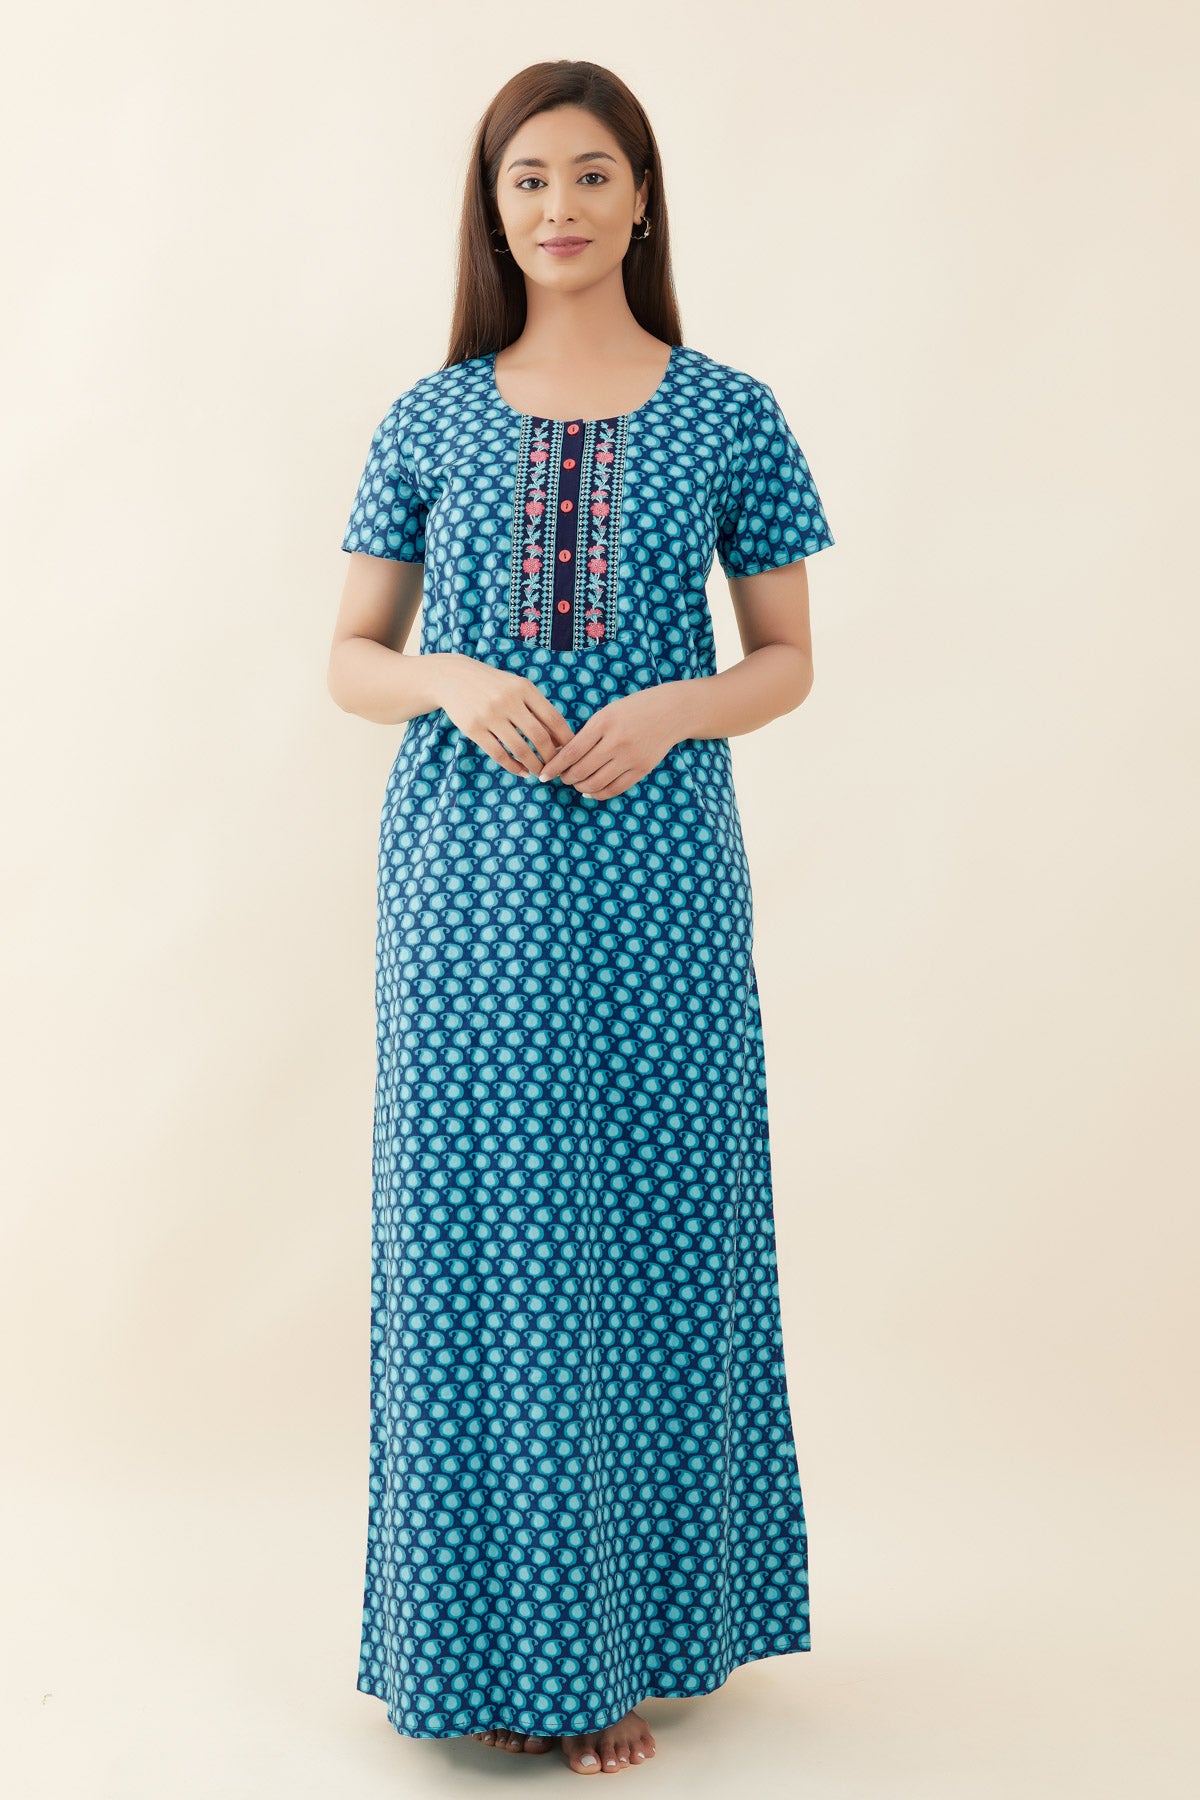 All Over Paisley Printed With Contrast Embroidered Yoke Nighty - Blue